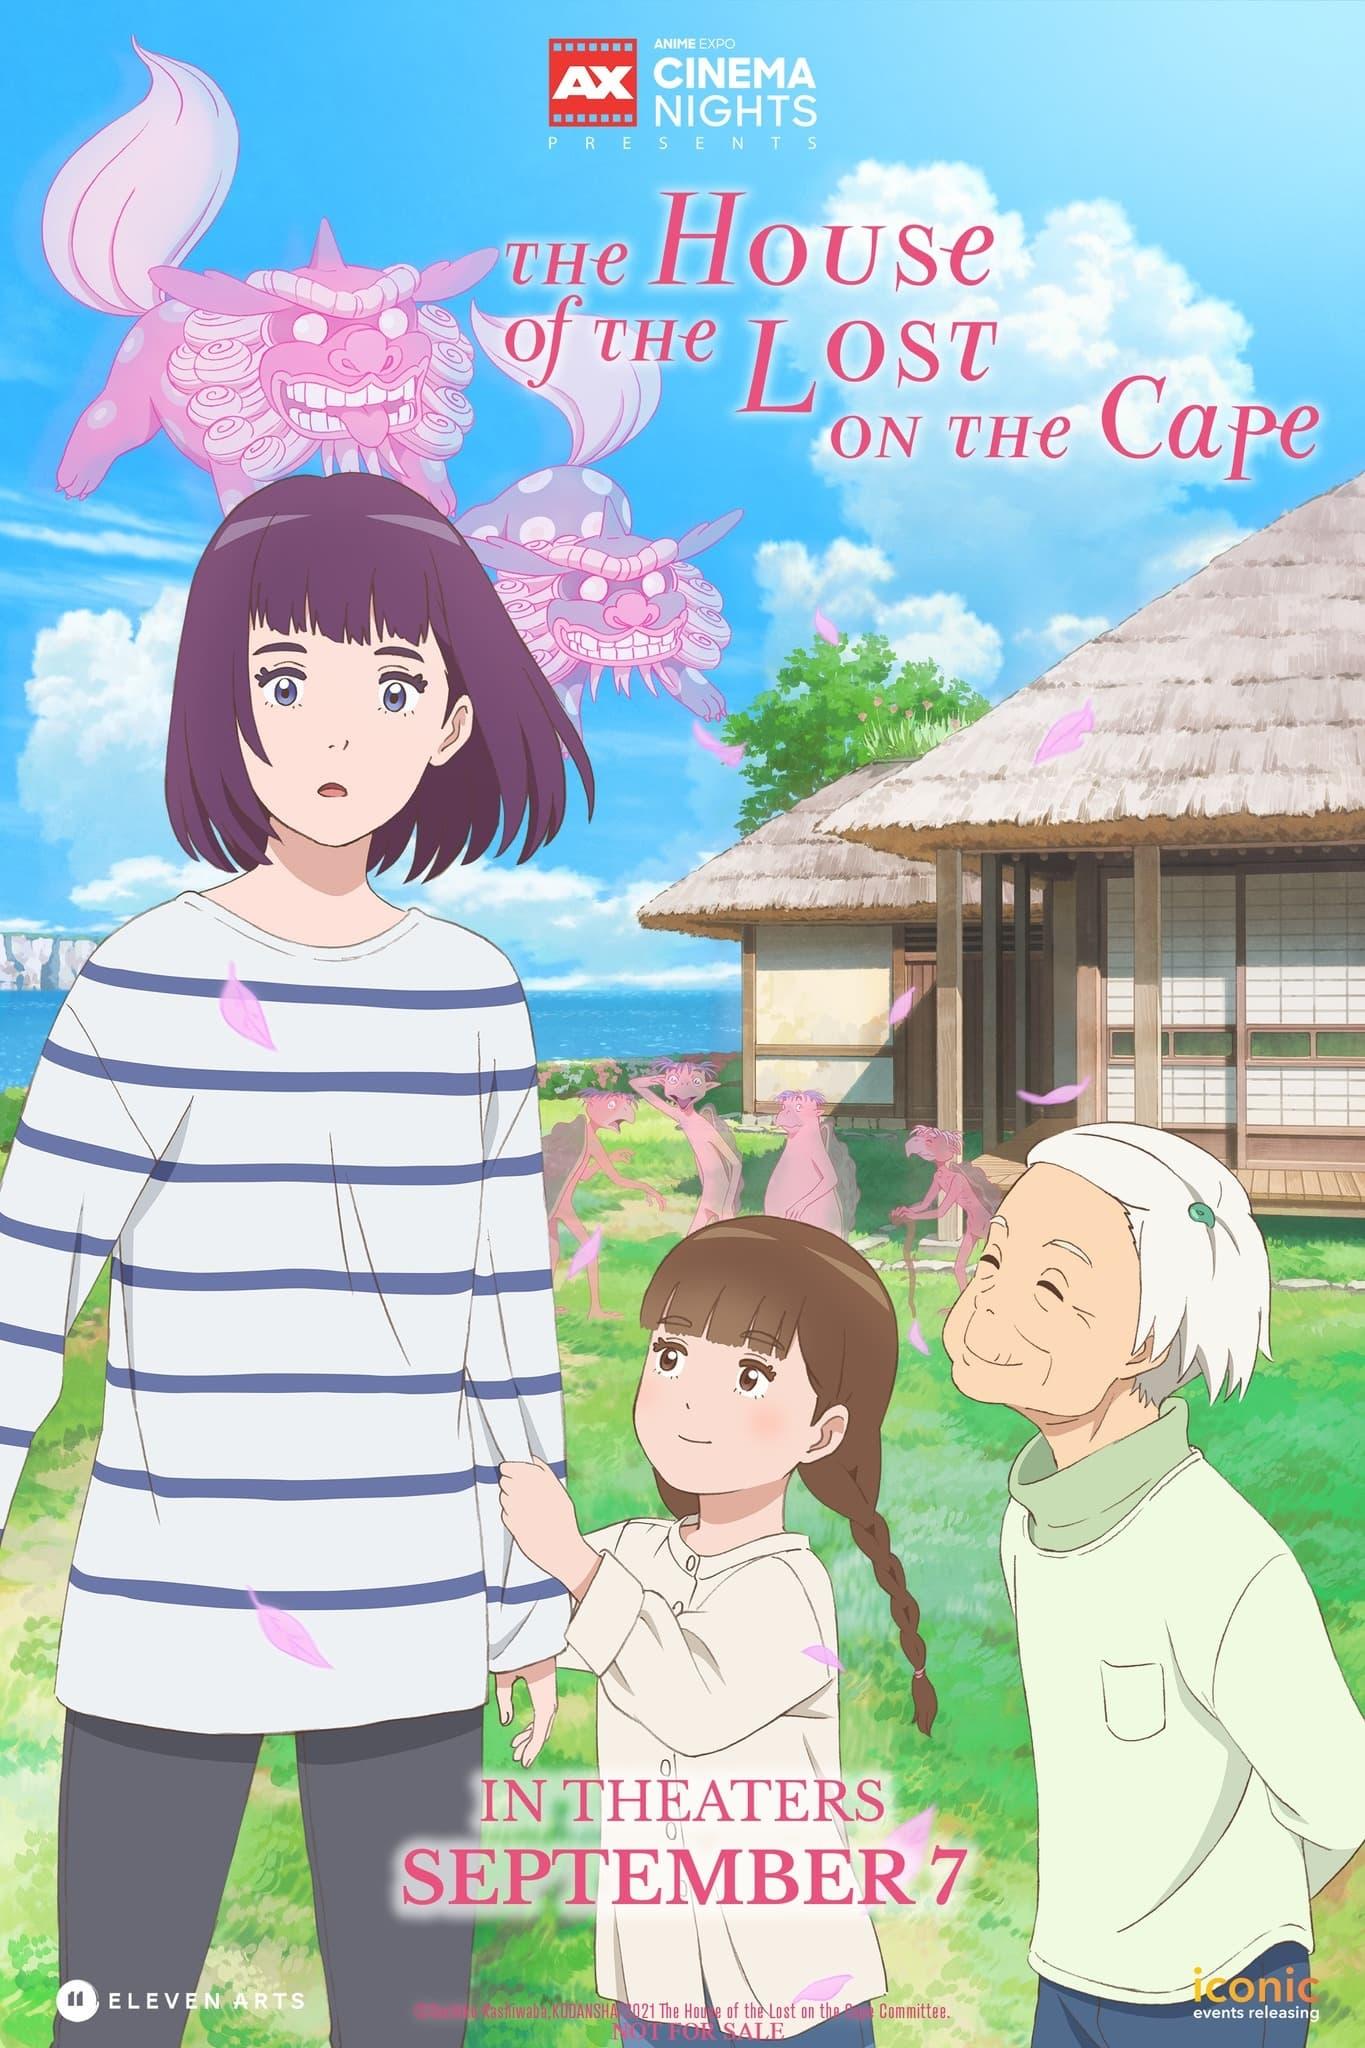 The House of the Lost on the Cape poster